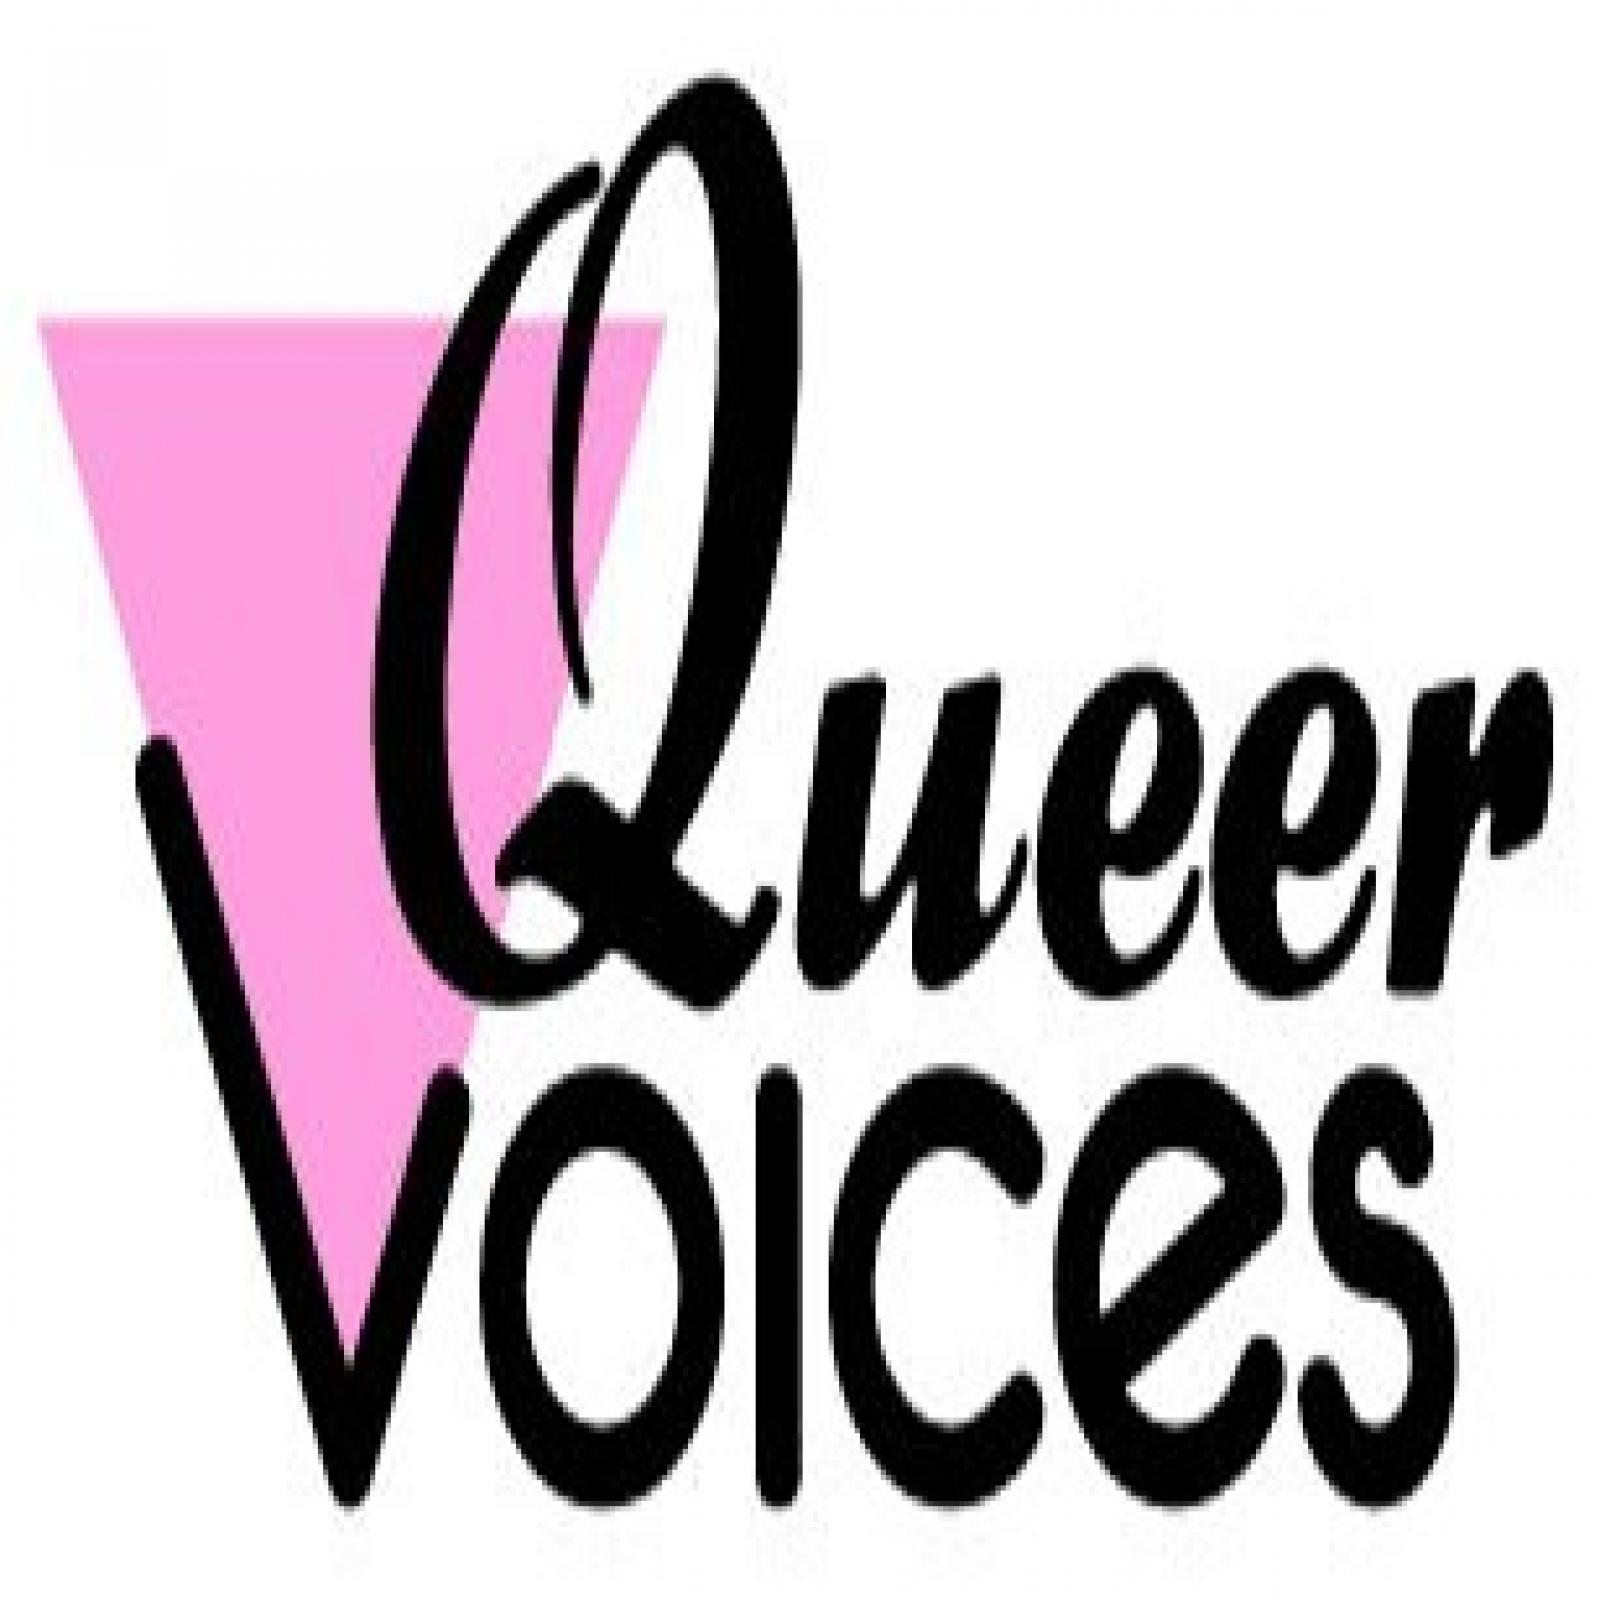 KPFT - Queer Voices